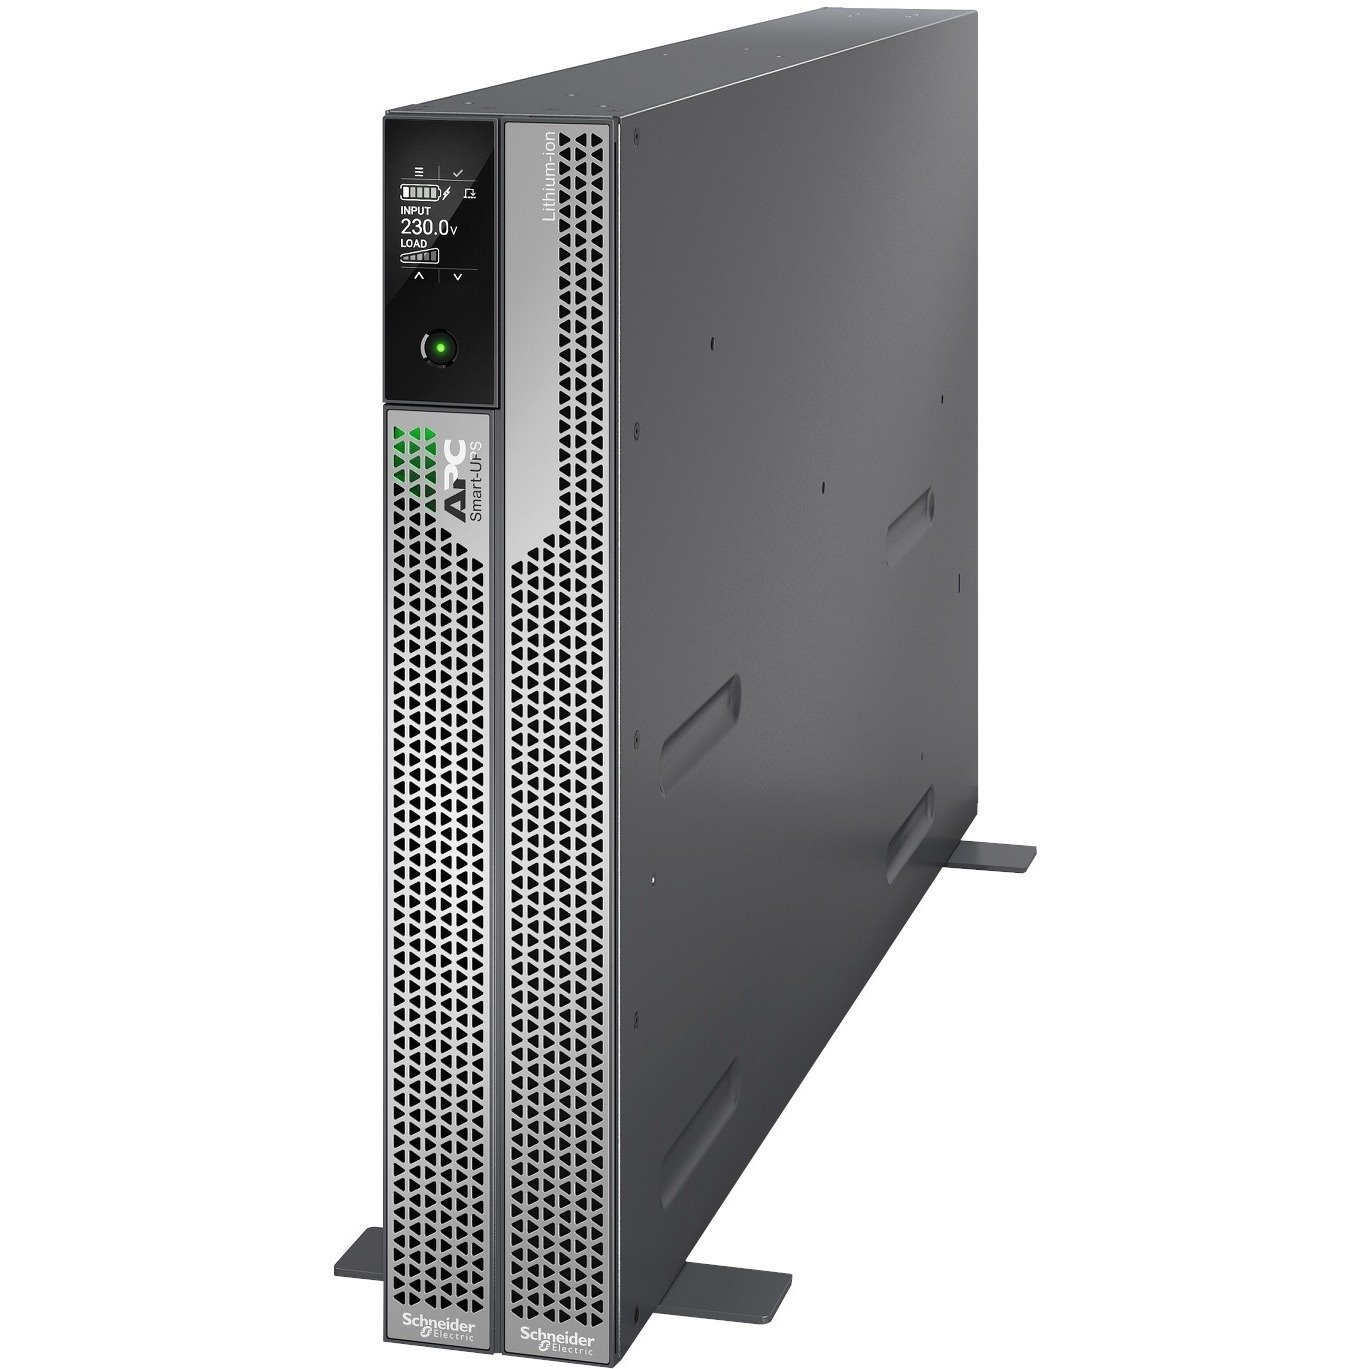 APC by Schneider Electric Smart-UPS Double Conversion Online UPS - 5 kVA/5 kW